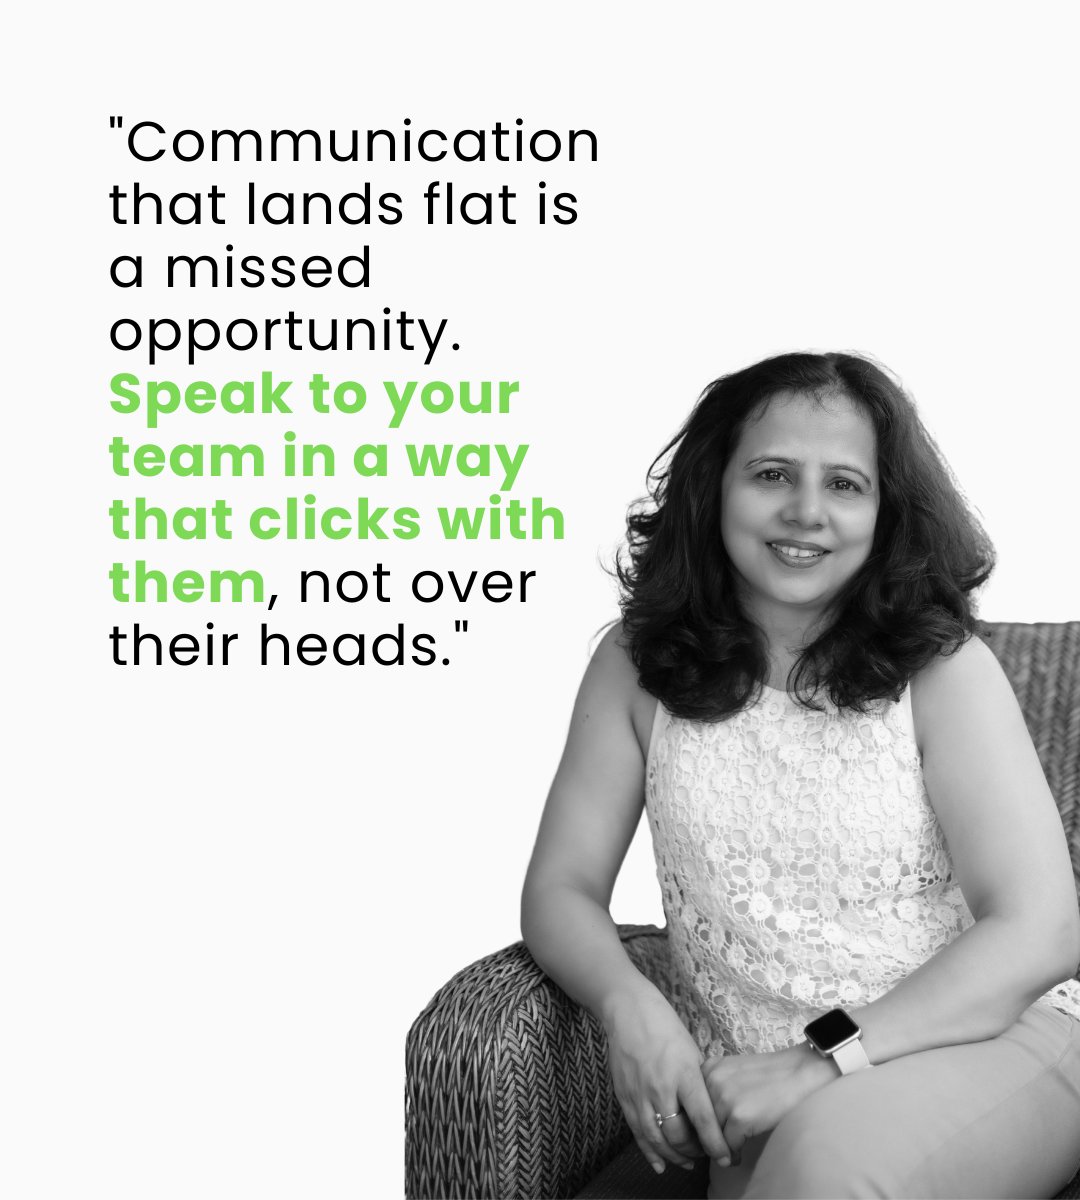 In today's multigenerational workplace, a one-size-fits-all communication strategy won't cut it. So remember, speak to your employees where they are!

#communication #team #internalcommunication #diversity